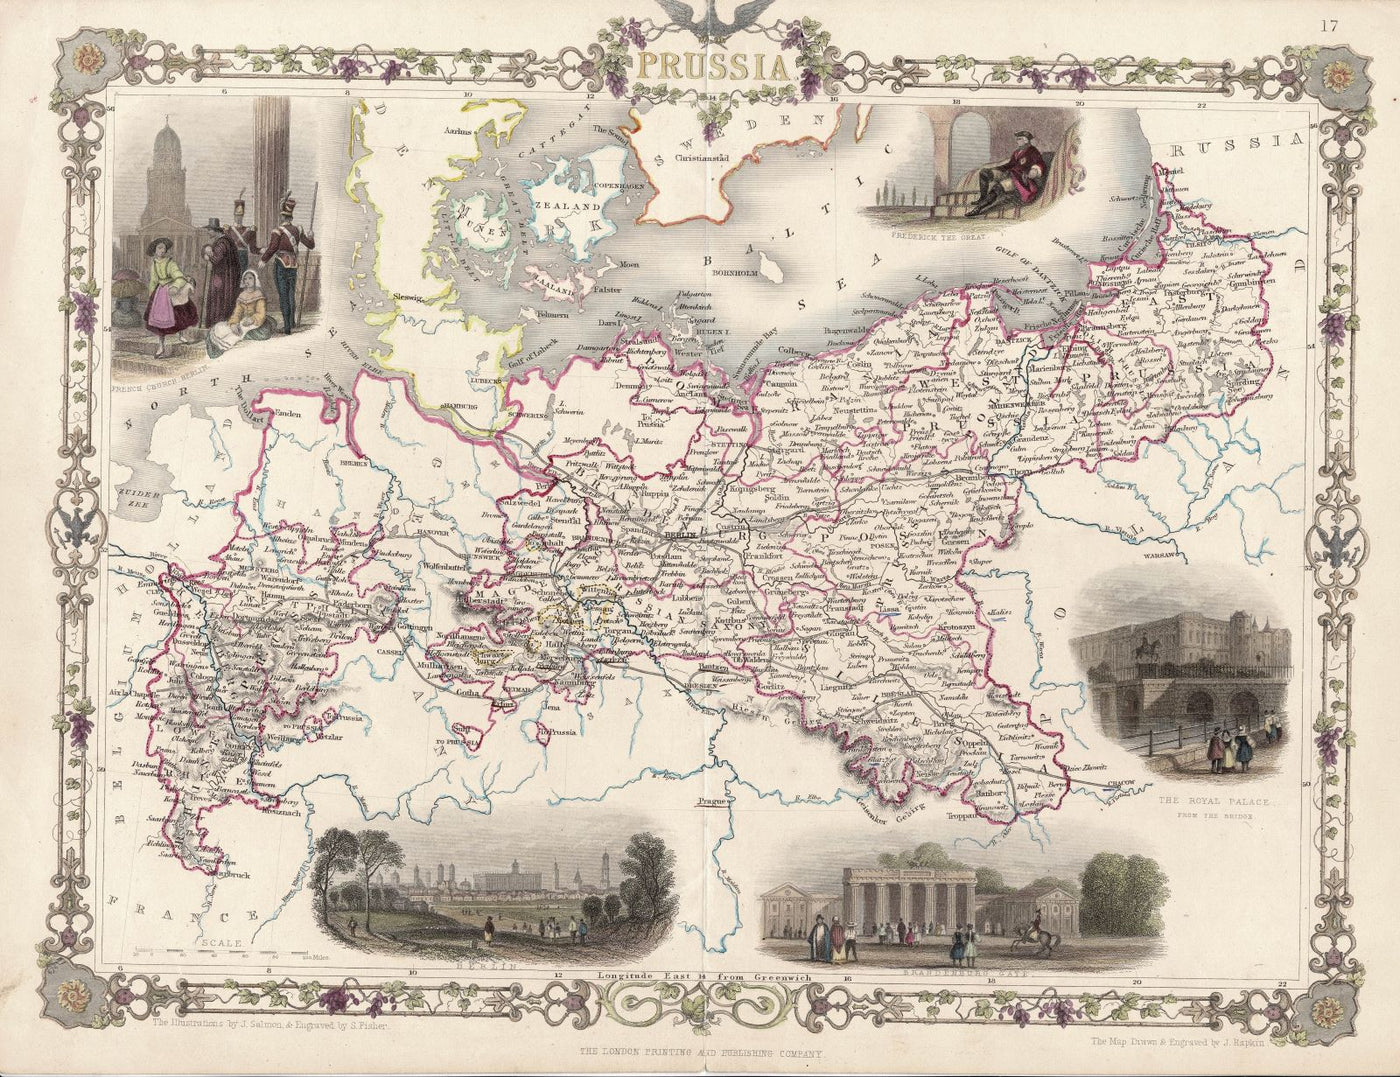 Prussia  guaranteed antique map published by John Tallis in 1851